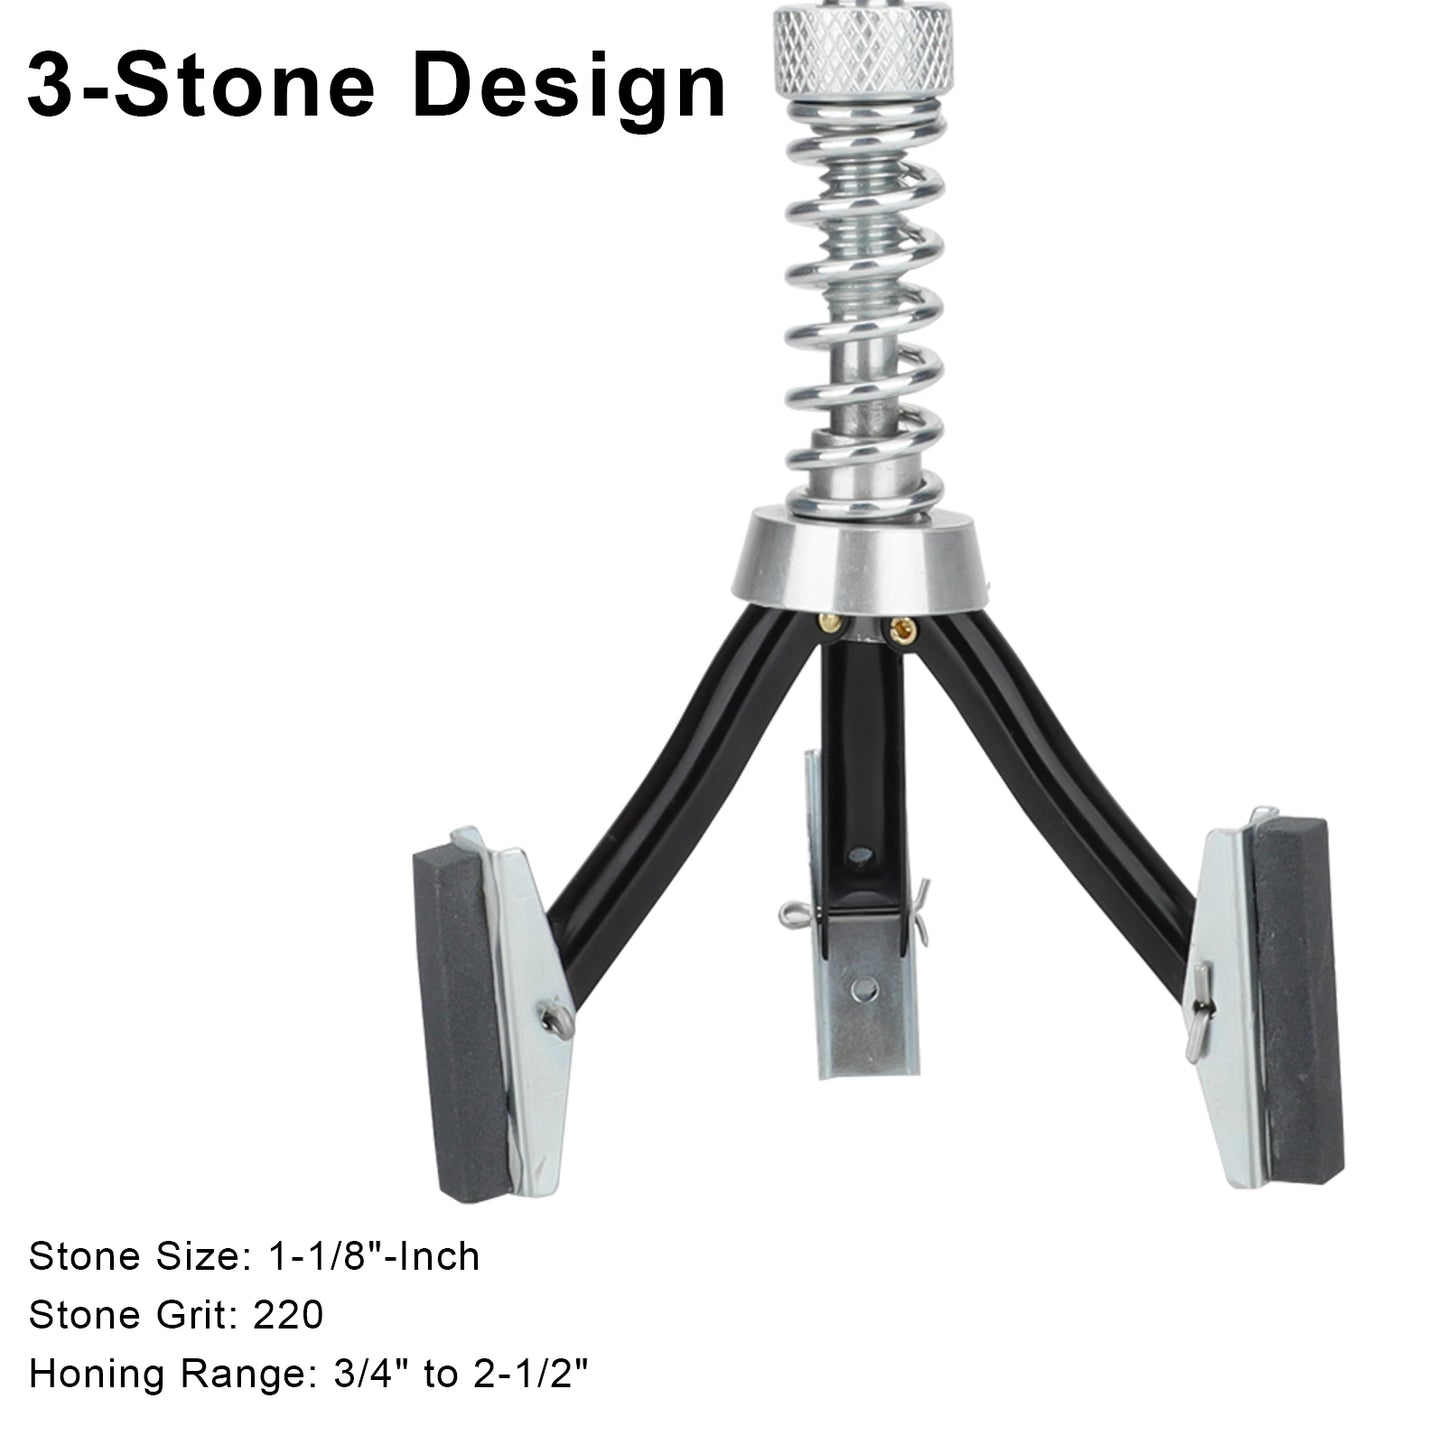 Car Engine Cylinder Hone Tool - 3/4" to 2-1/2"Wide,220 grit stones,Versatile 3 Stone Design ,Adjustable Precision, Electric Drill-Compatible ,Ideal for Carbon, Rust, and Heat Glaze Deposits